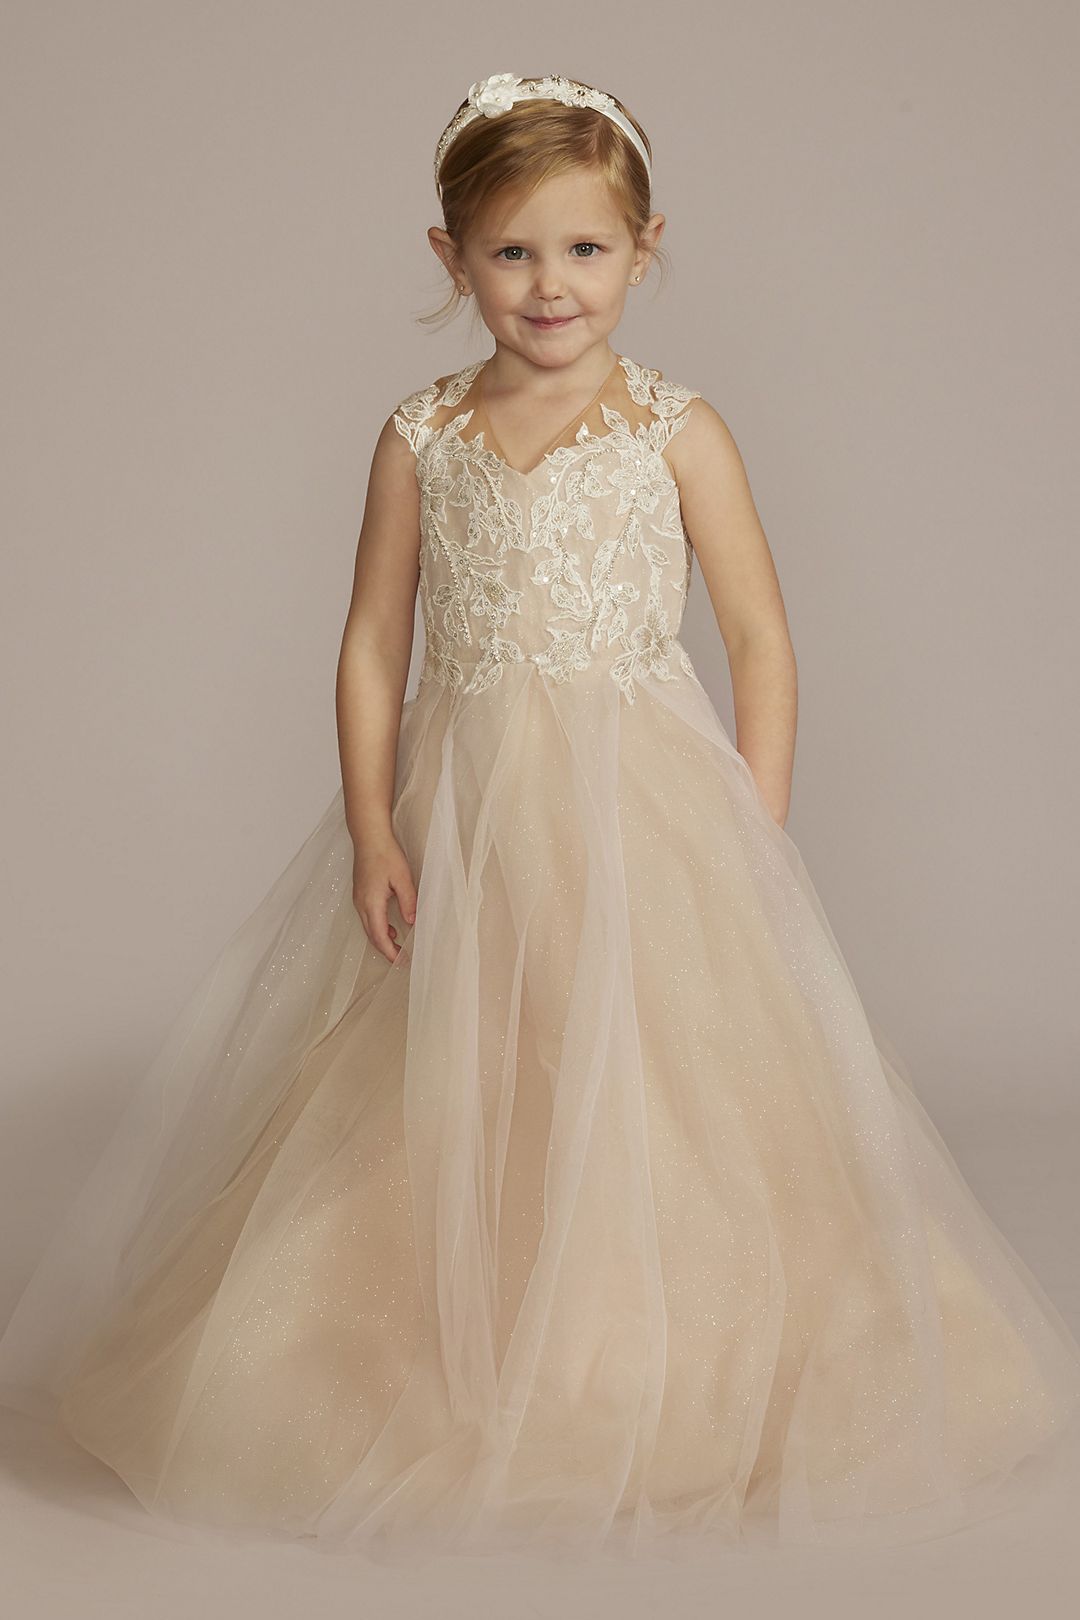 Gradient Flower Girl Dress With Tiered Tulle Fluffy Skirt. 